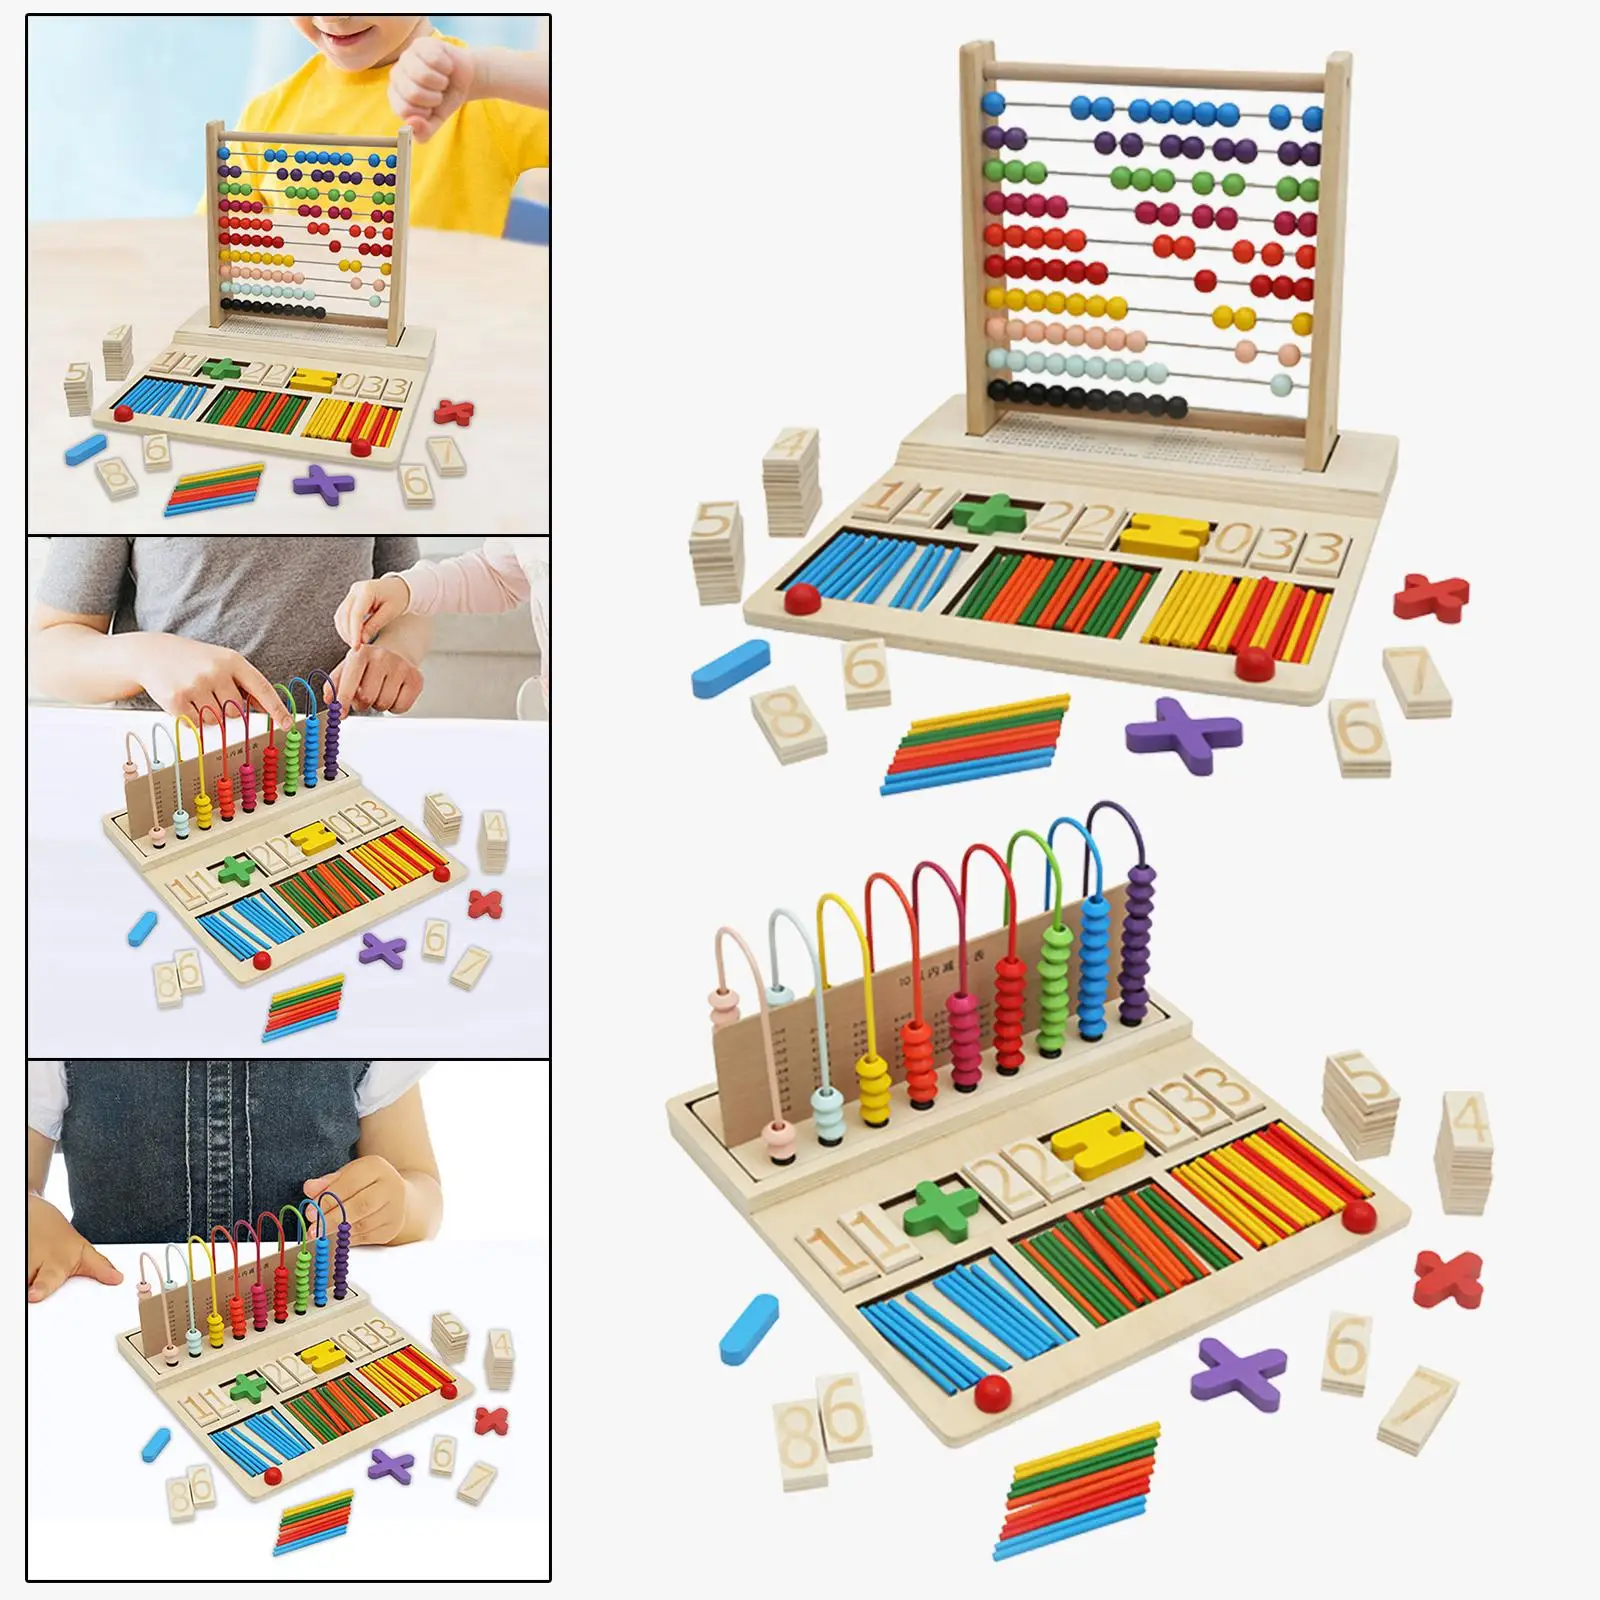 Math Learning Toys Counting Math Games Classic Counting Tool Educational Colorful Beads Counting Toys for Kids Holiday Gifts